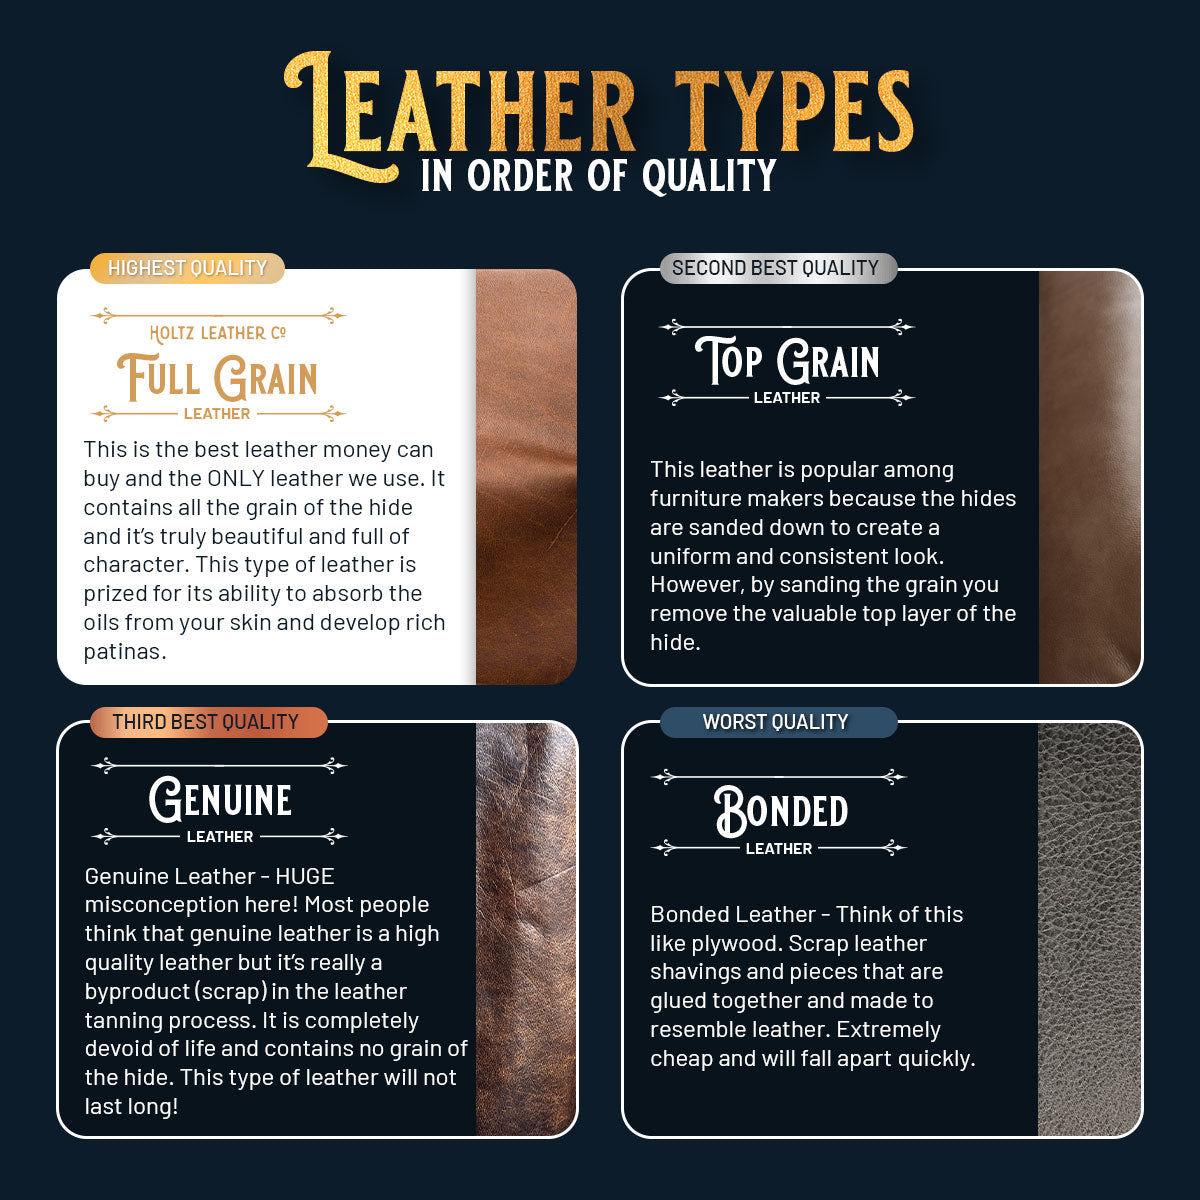 Full Grain Leather vs. Top Grain Leather - What's the Difference?